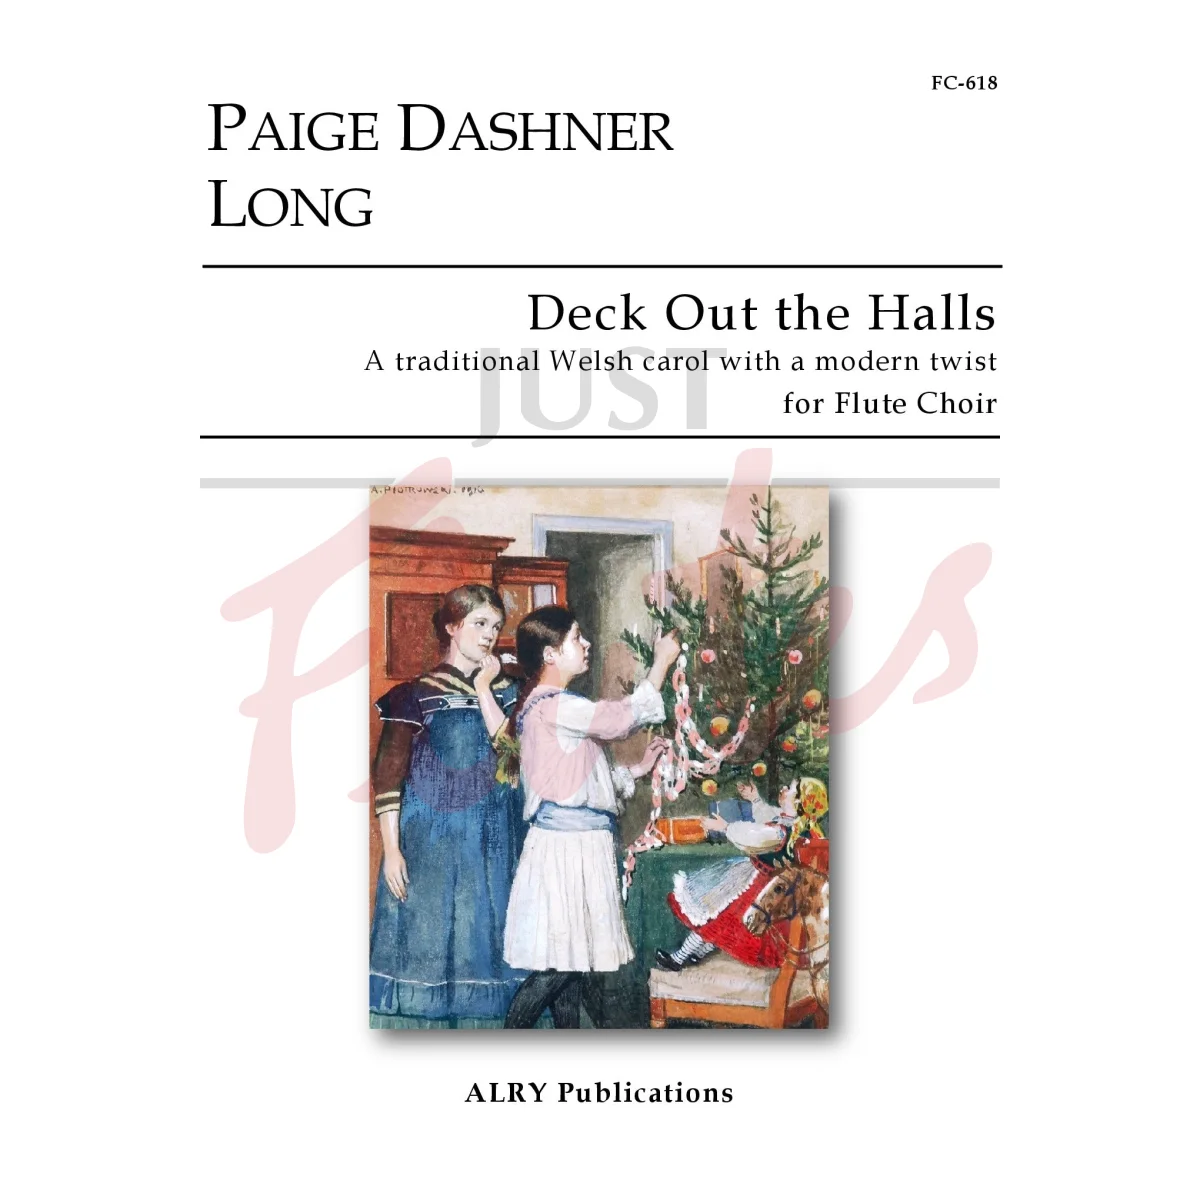 Deck Out the Halls for Flute Choir